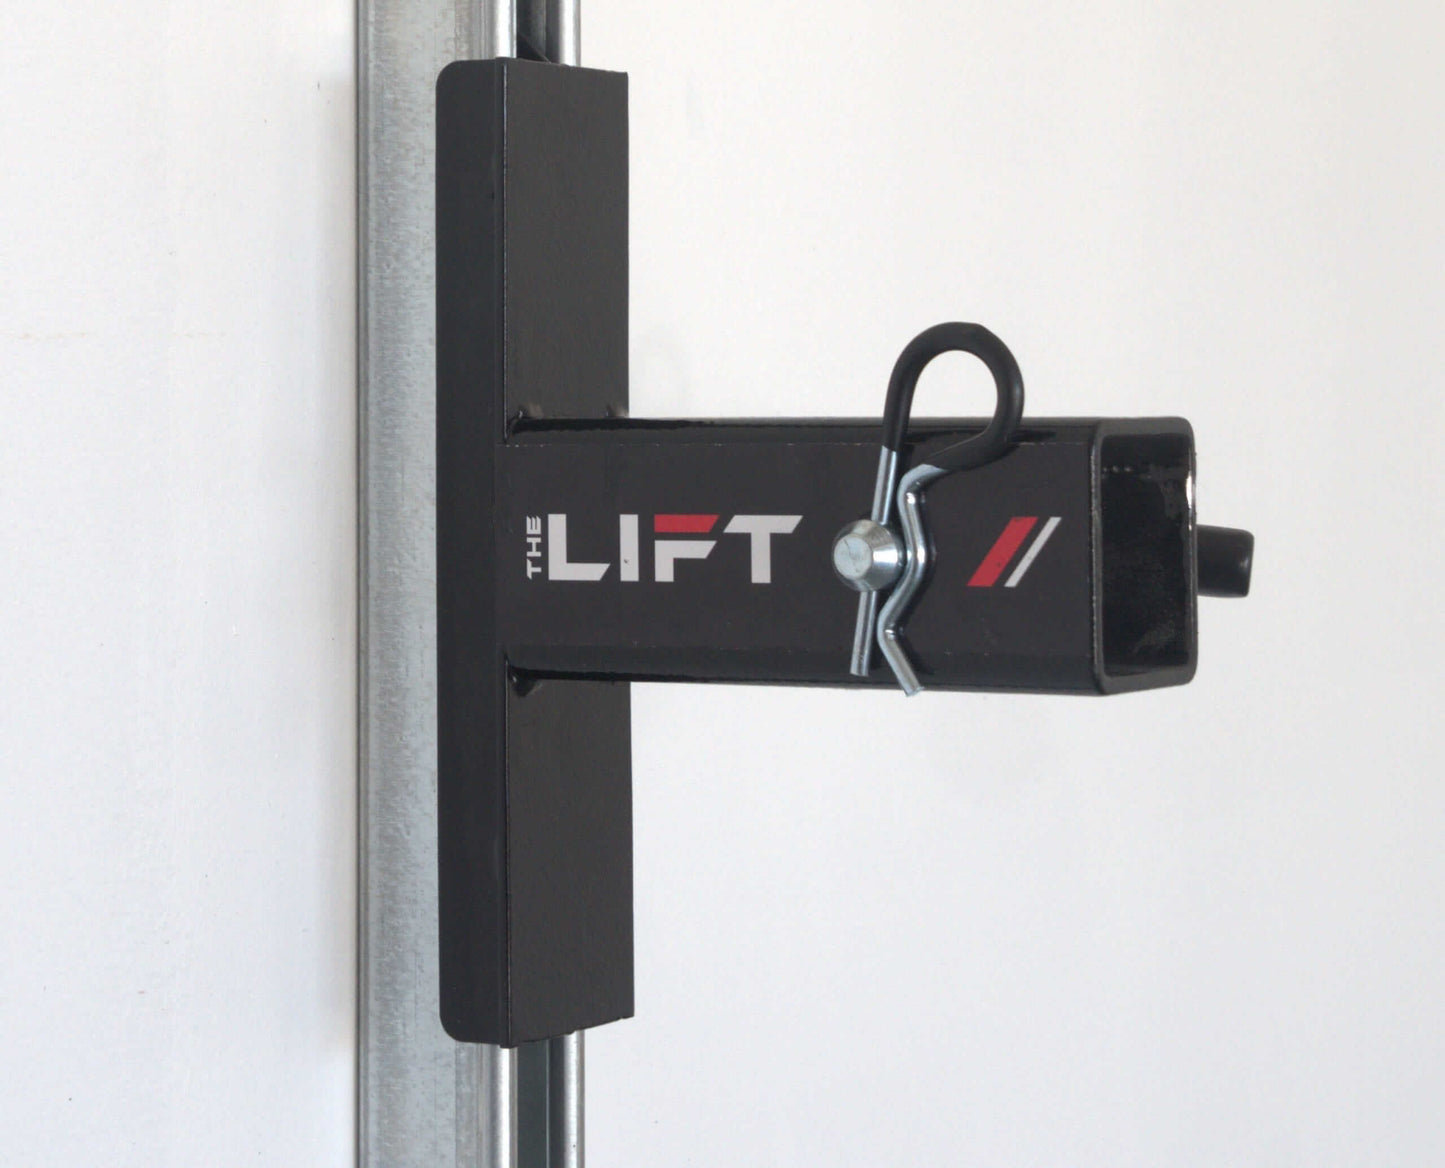 Top Shelf Storage Solutions - The Lift